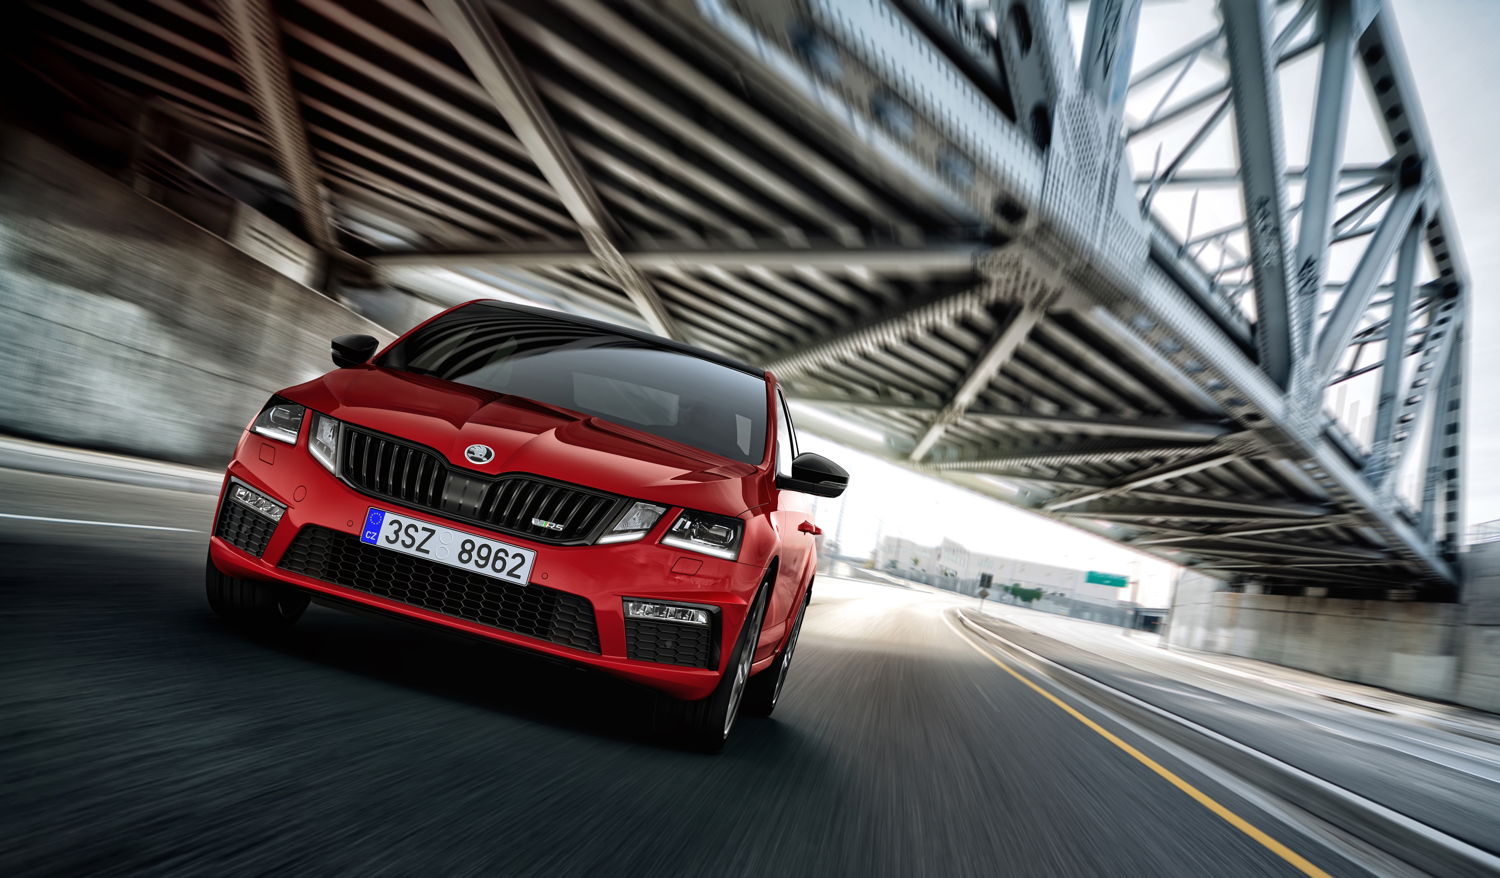 The new ŠKODA OCTAVIA RS 245 delivers 180 kW (245 PS) – this is 11 kW (15 PS) more than the previous top-of-the-range RS variant had to offer.